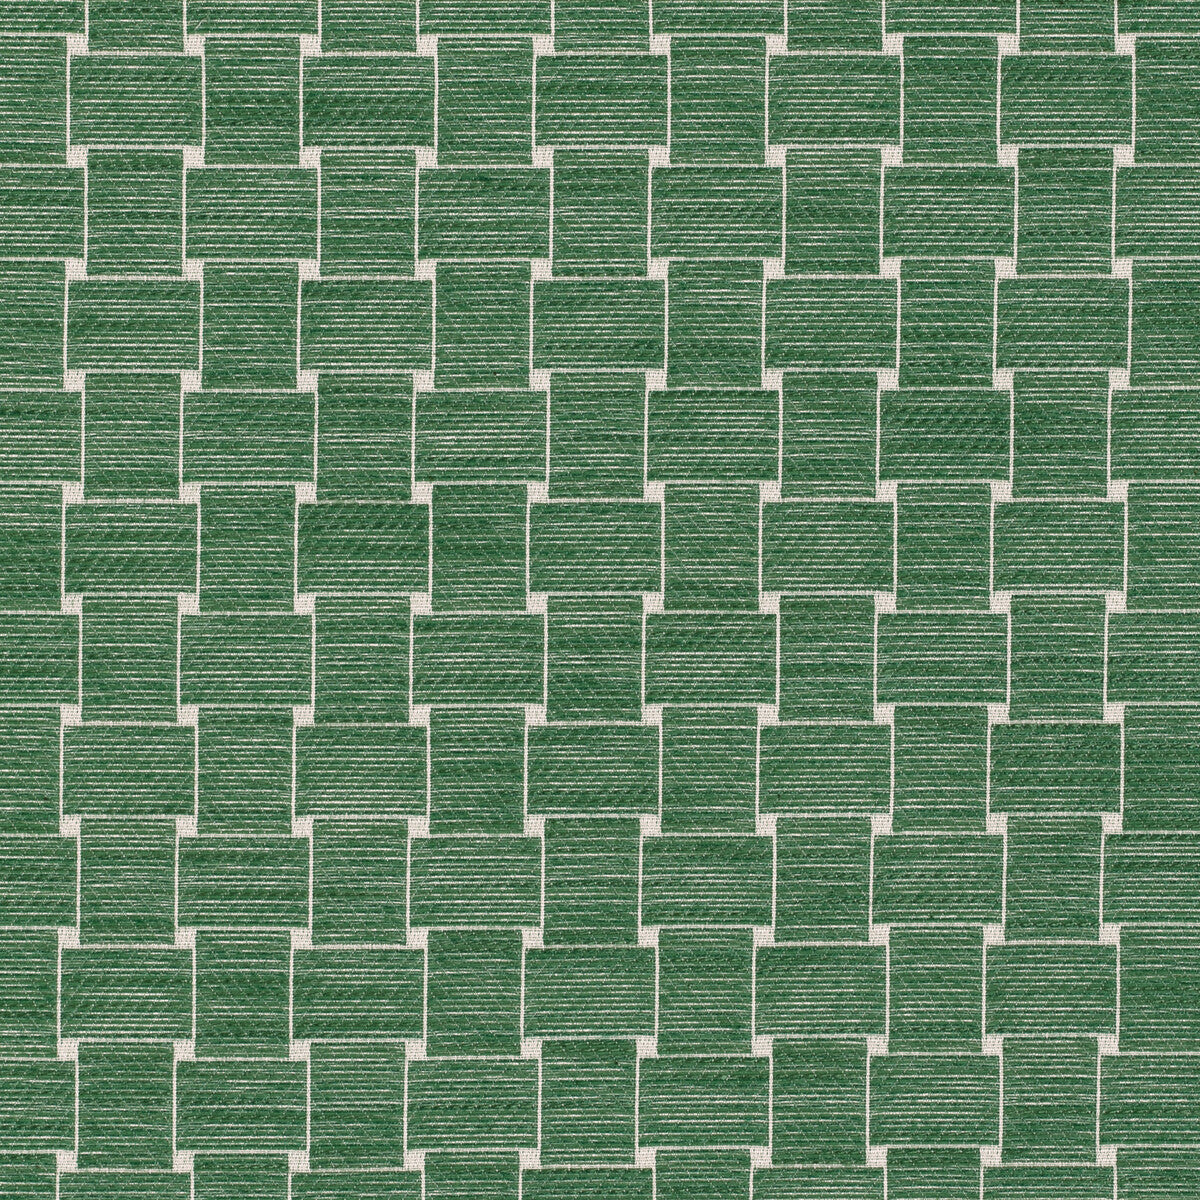 Beaumois Woven fabric in emerald color - pattern 8020108.53.0 - by Brunschwig &amp; Fils